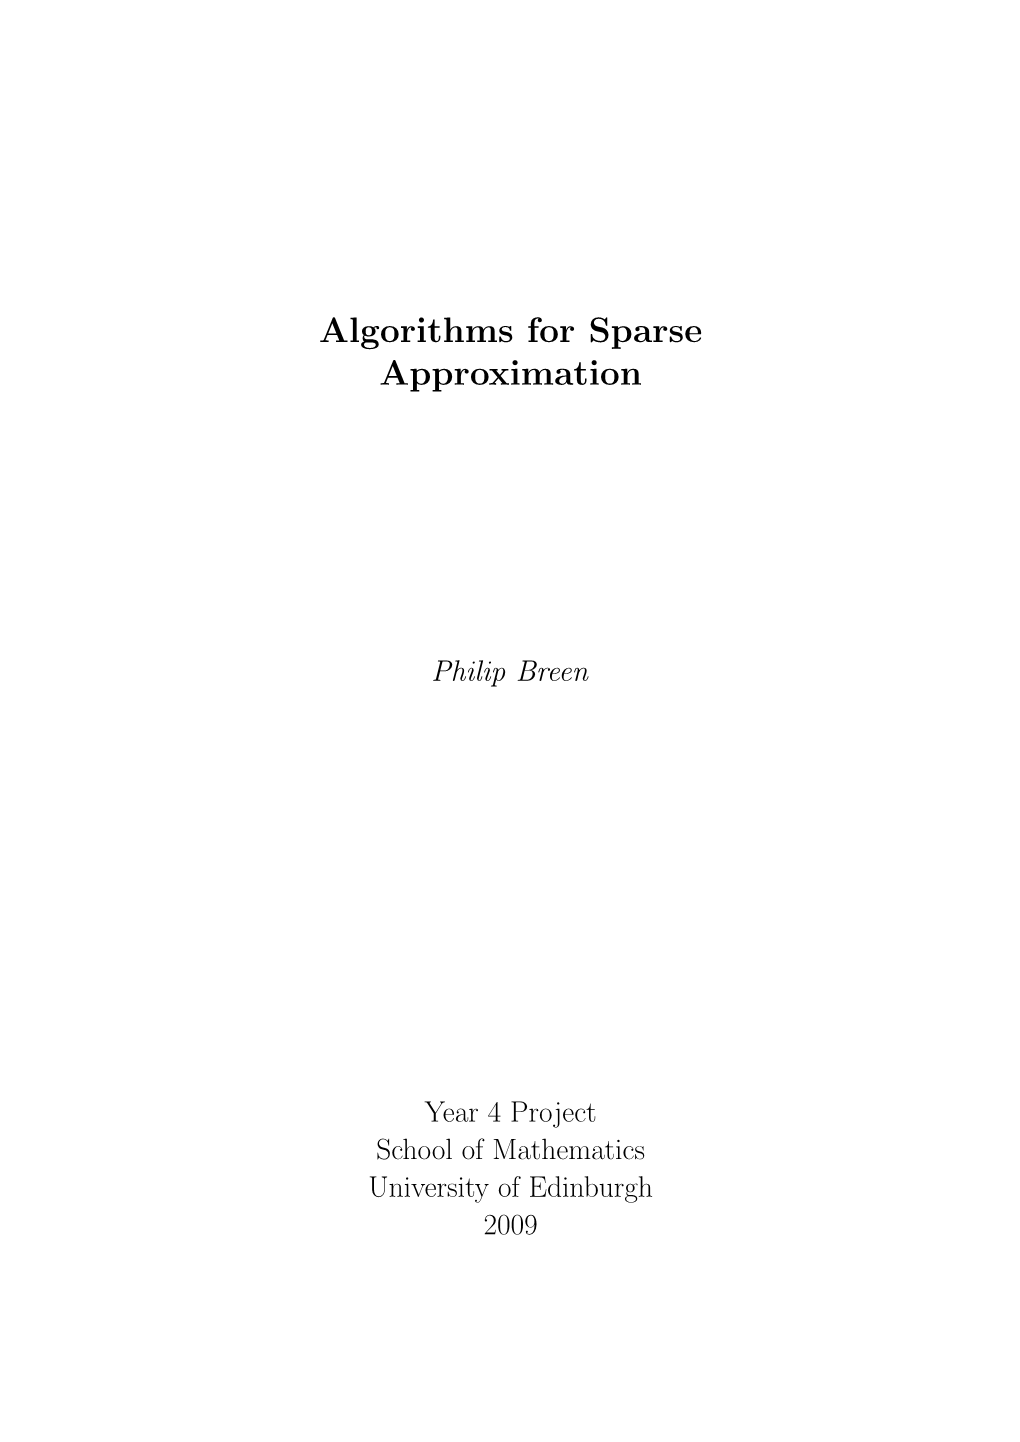 Algorithms for Sparse Approximation